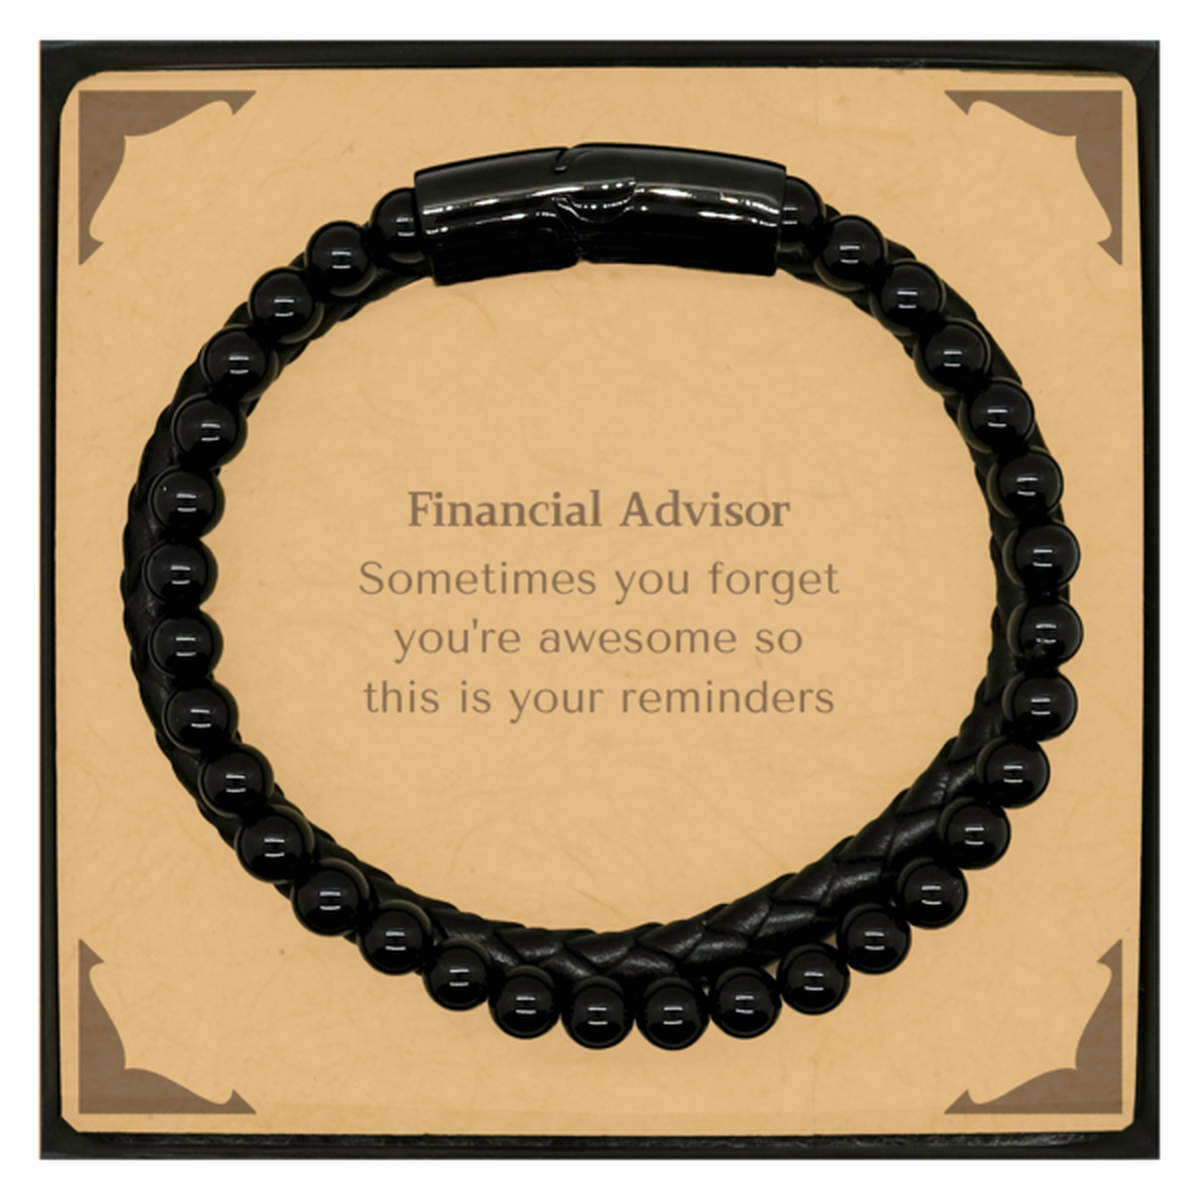 Sentimental Financial Advisor Stone Leather Bracelets, Financial Advisor Sometimes you forget you're awesome so this is your reminders, Graduation Christmas Birthday Gifts for Financial Advisor, Men, Women, Coworkers